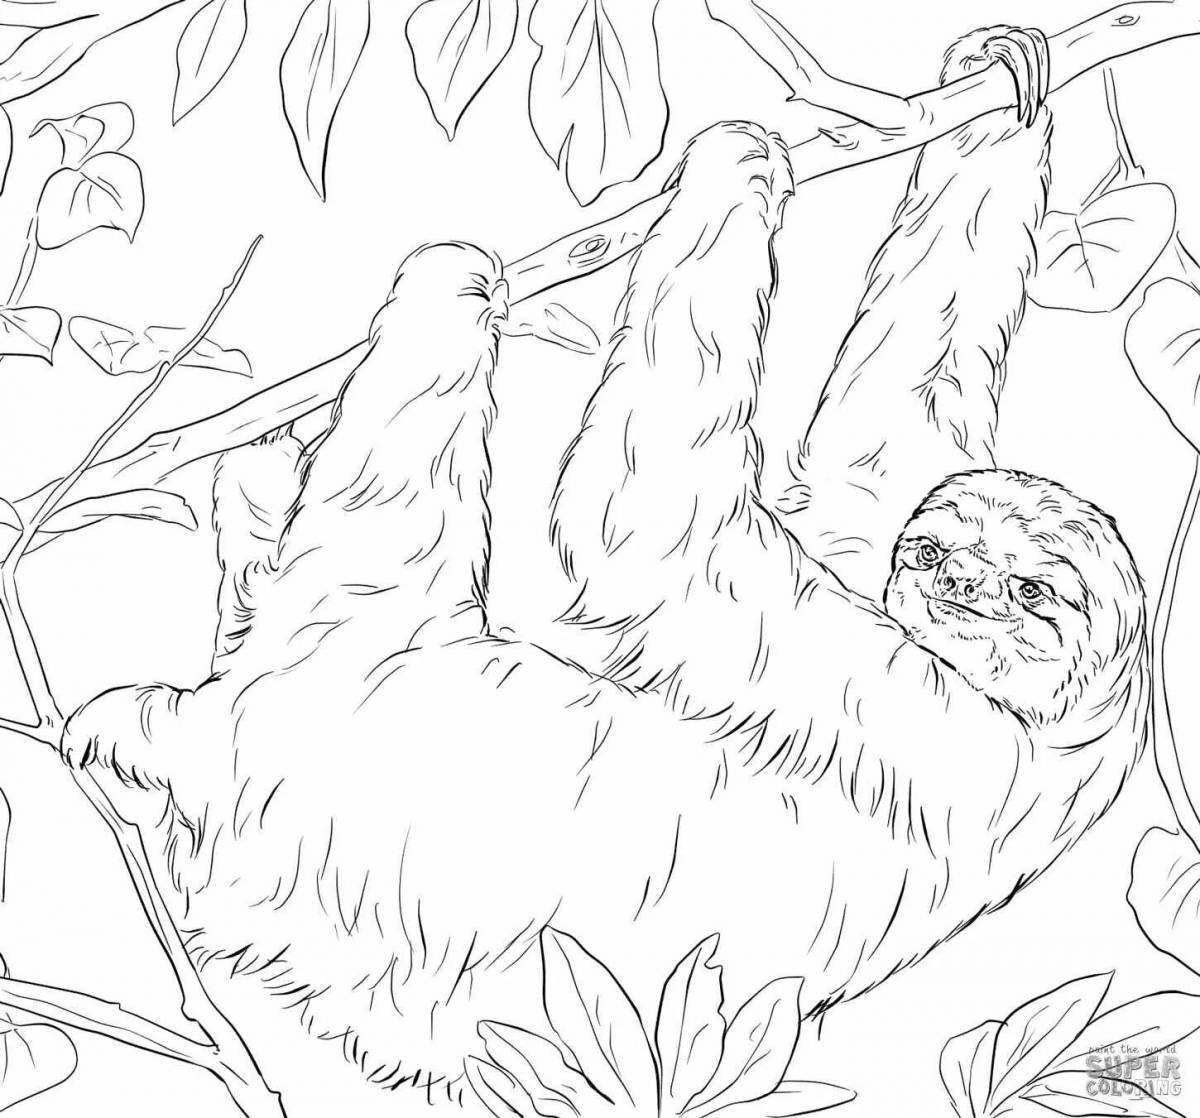 Coloring cute sloth for kids